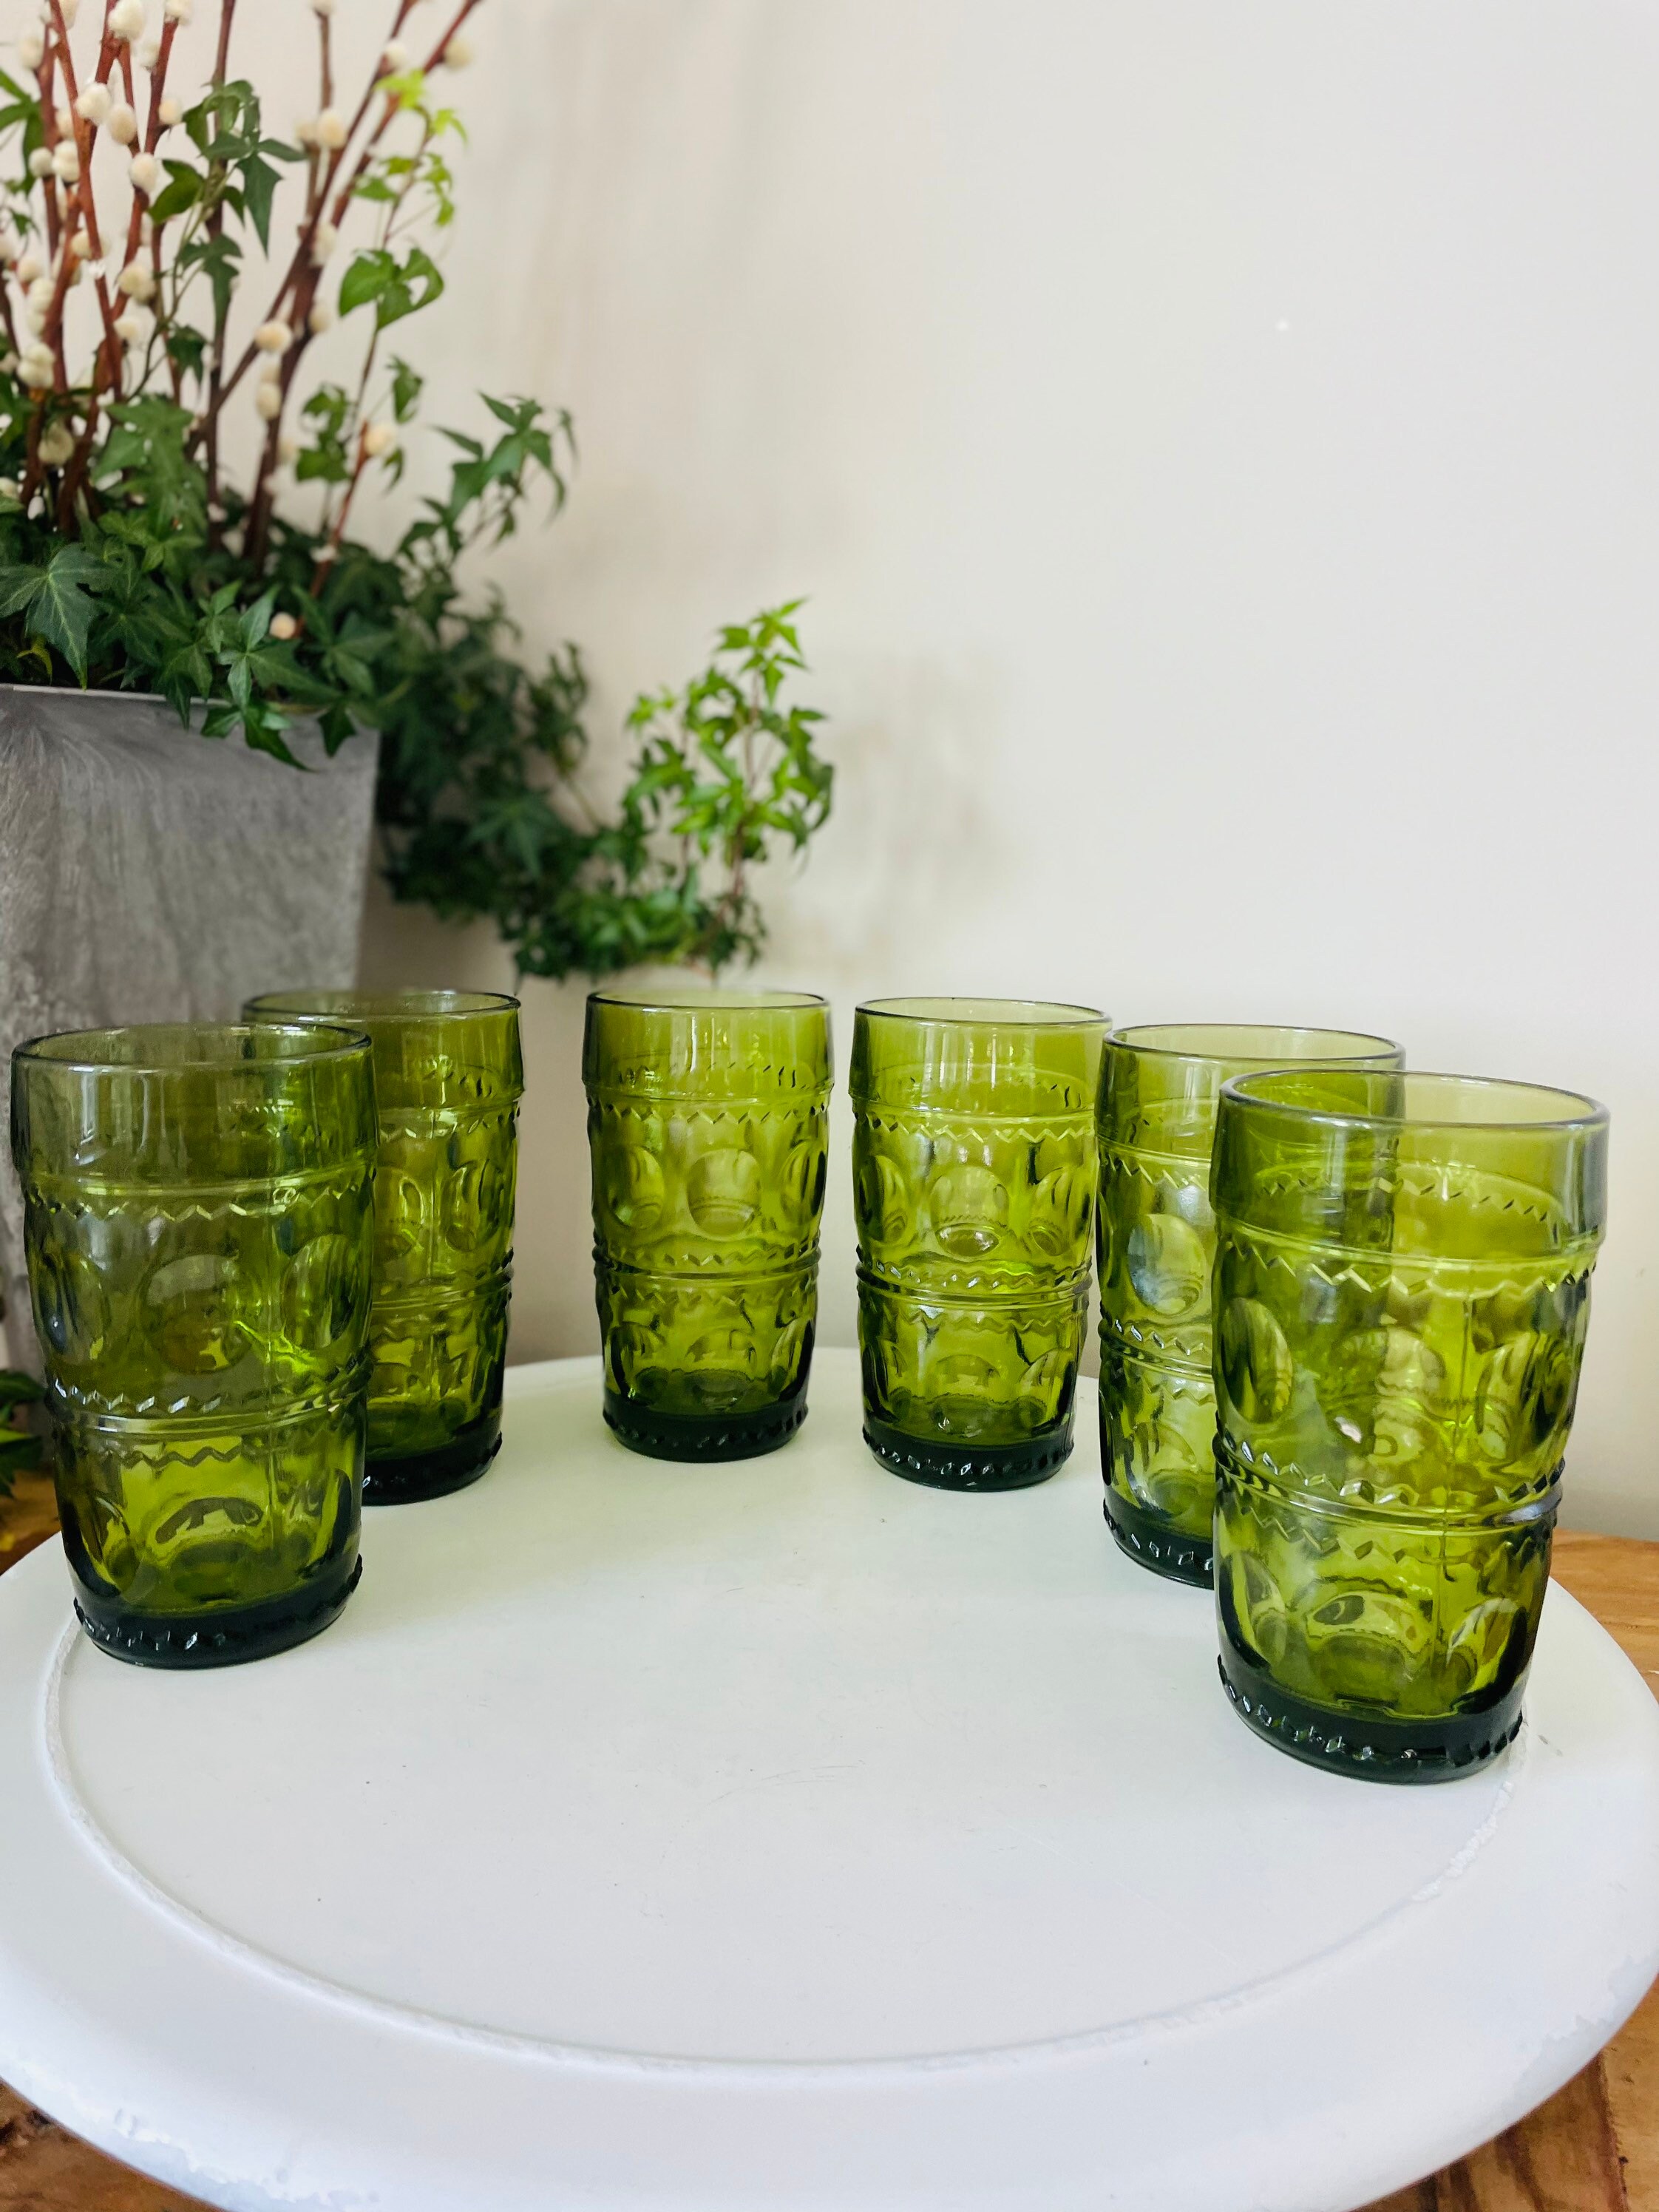 13 oz. Vintage Textured Sage Green Drinking Glass Cups (Set of 6